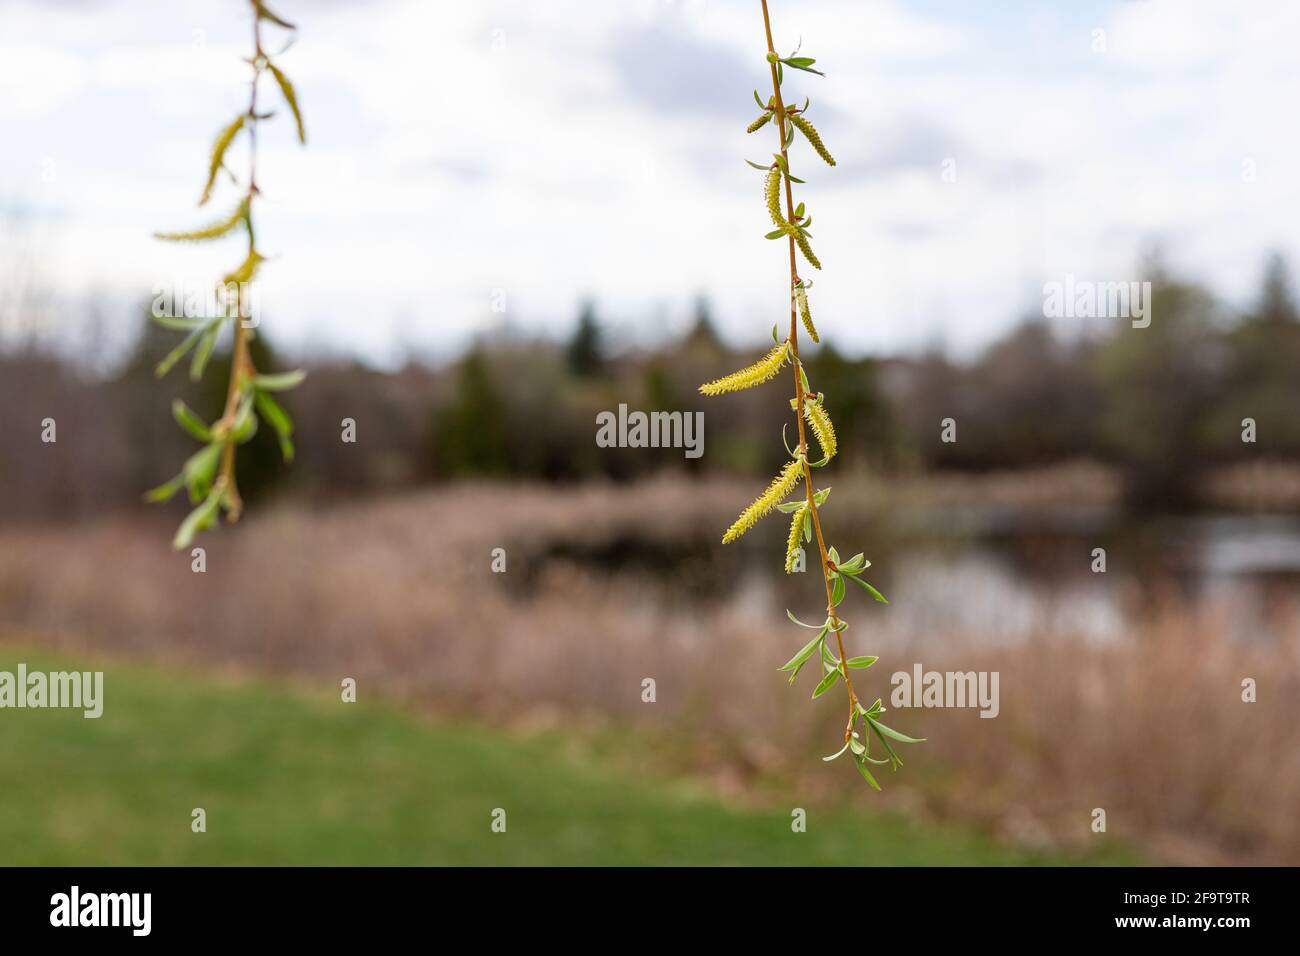 Branches of trees with growing leaves again blue sky and a pond in the background. Spring in the park. Stock Photo